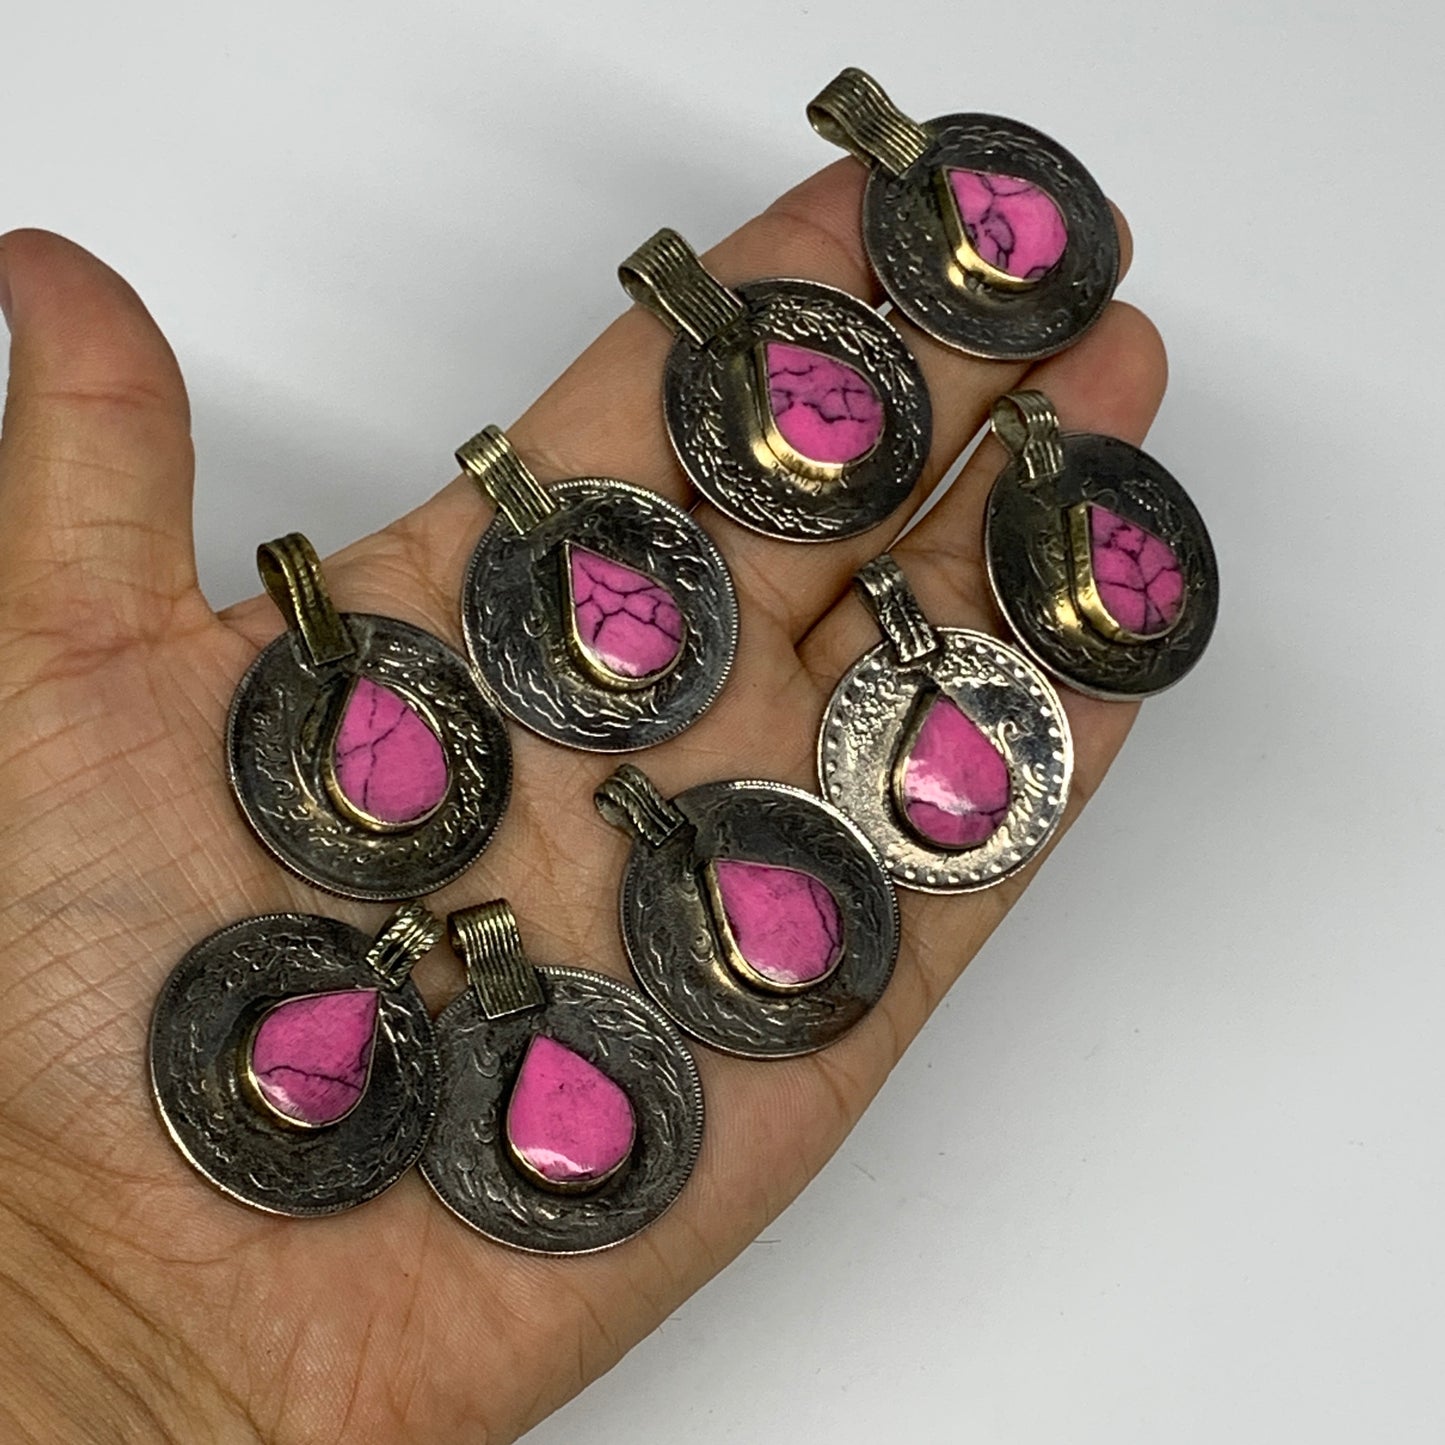 96g, 9pcs, Turkmen Coins Jeweled Synthetic Pink Tribal @Afghanistan, B14534